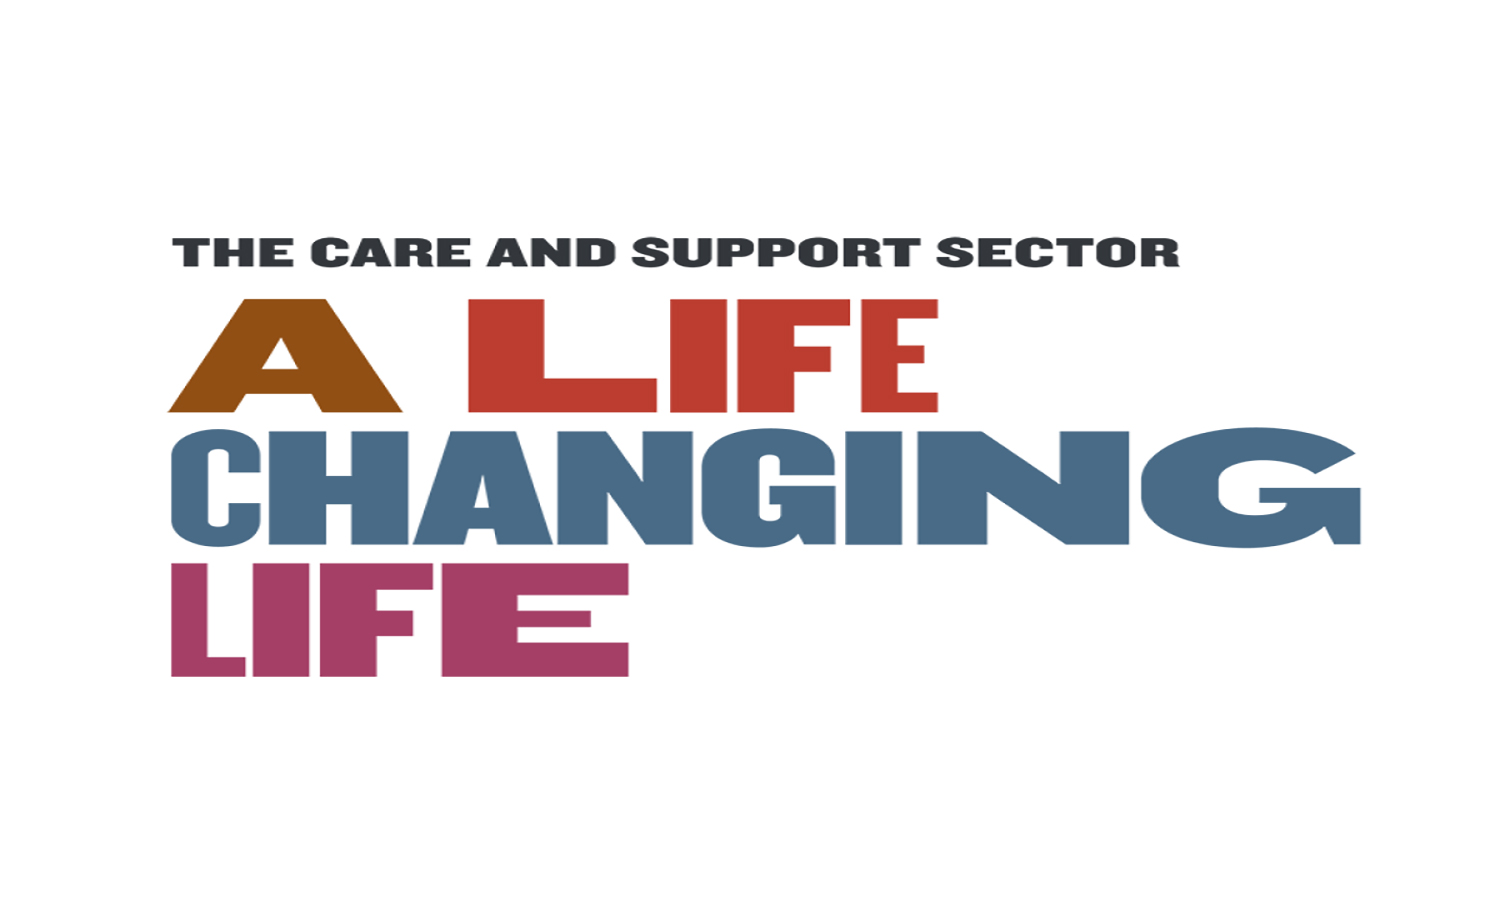 A Life Changing Life - Promoting the Care & Support Sector